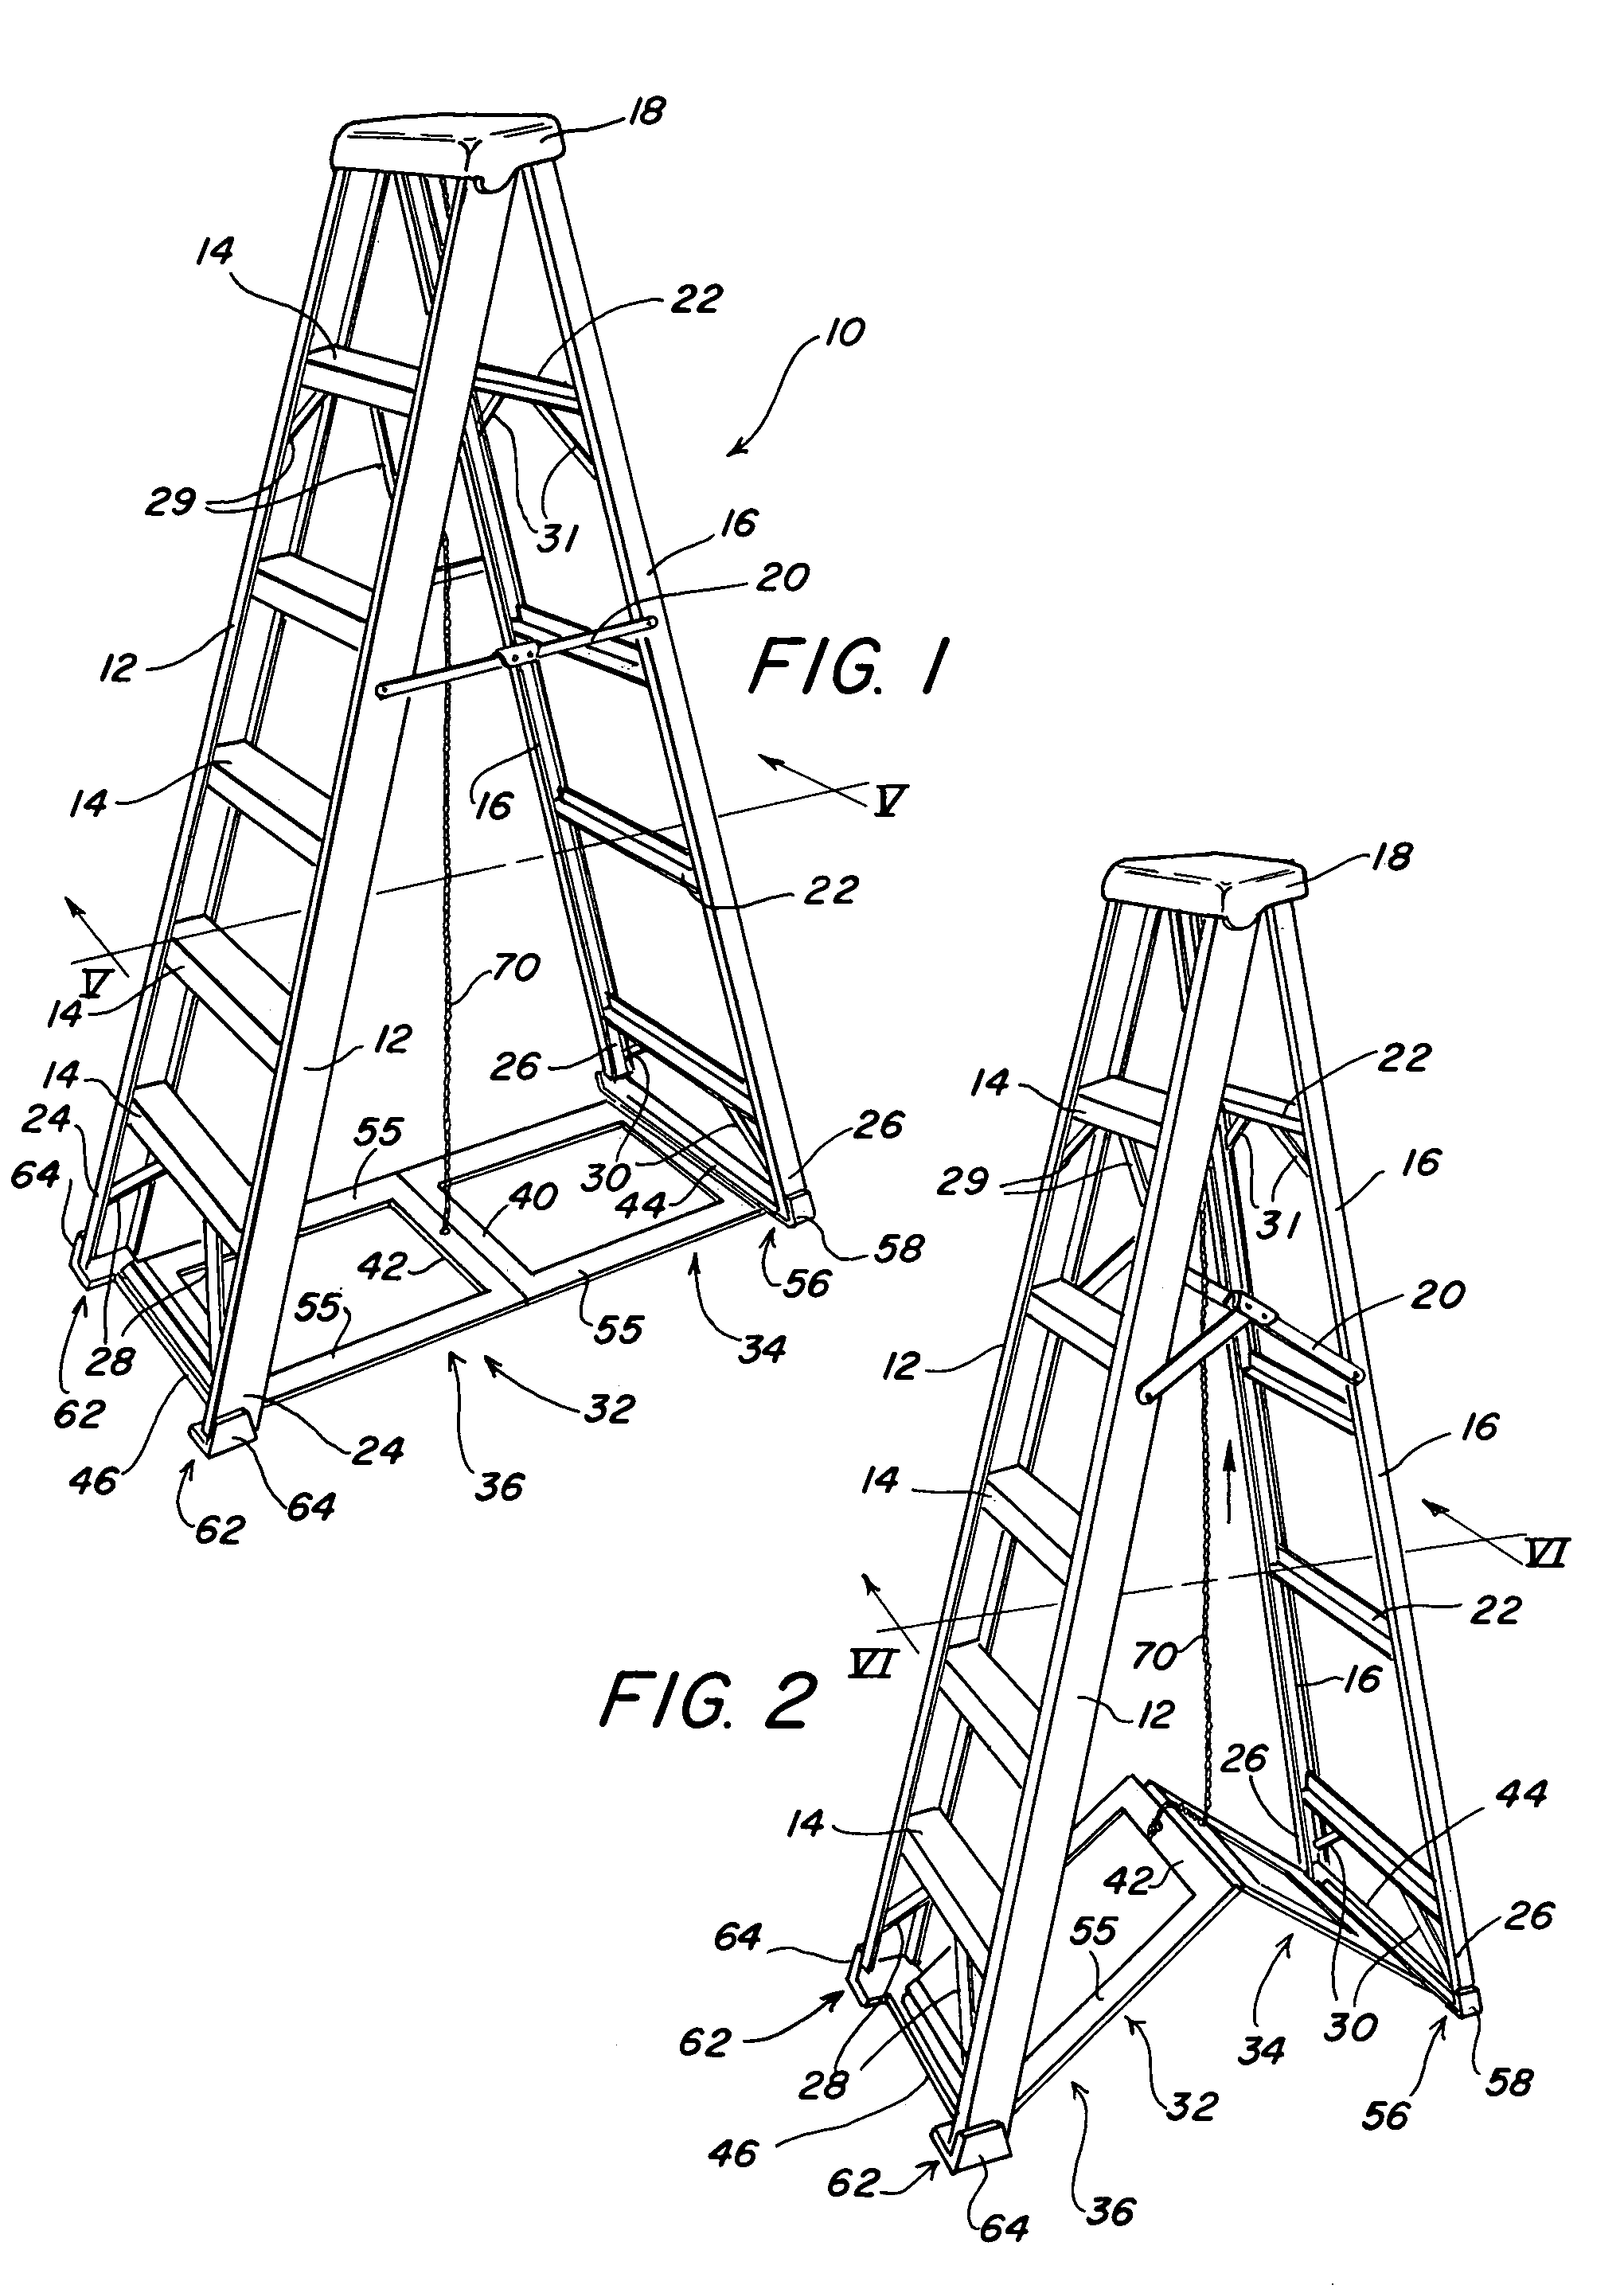 Stabilizer for folding step ladders